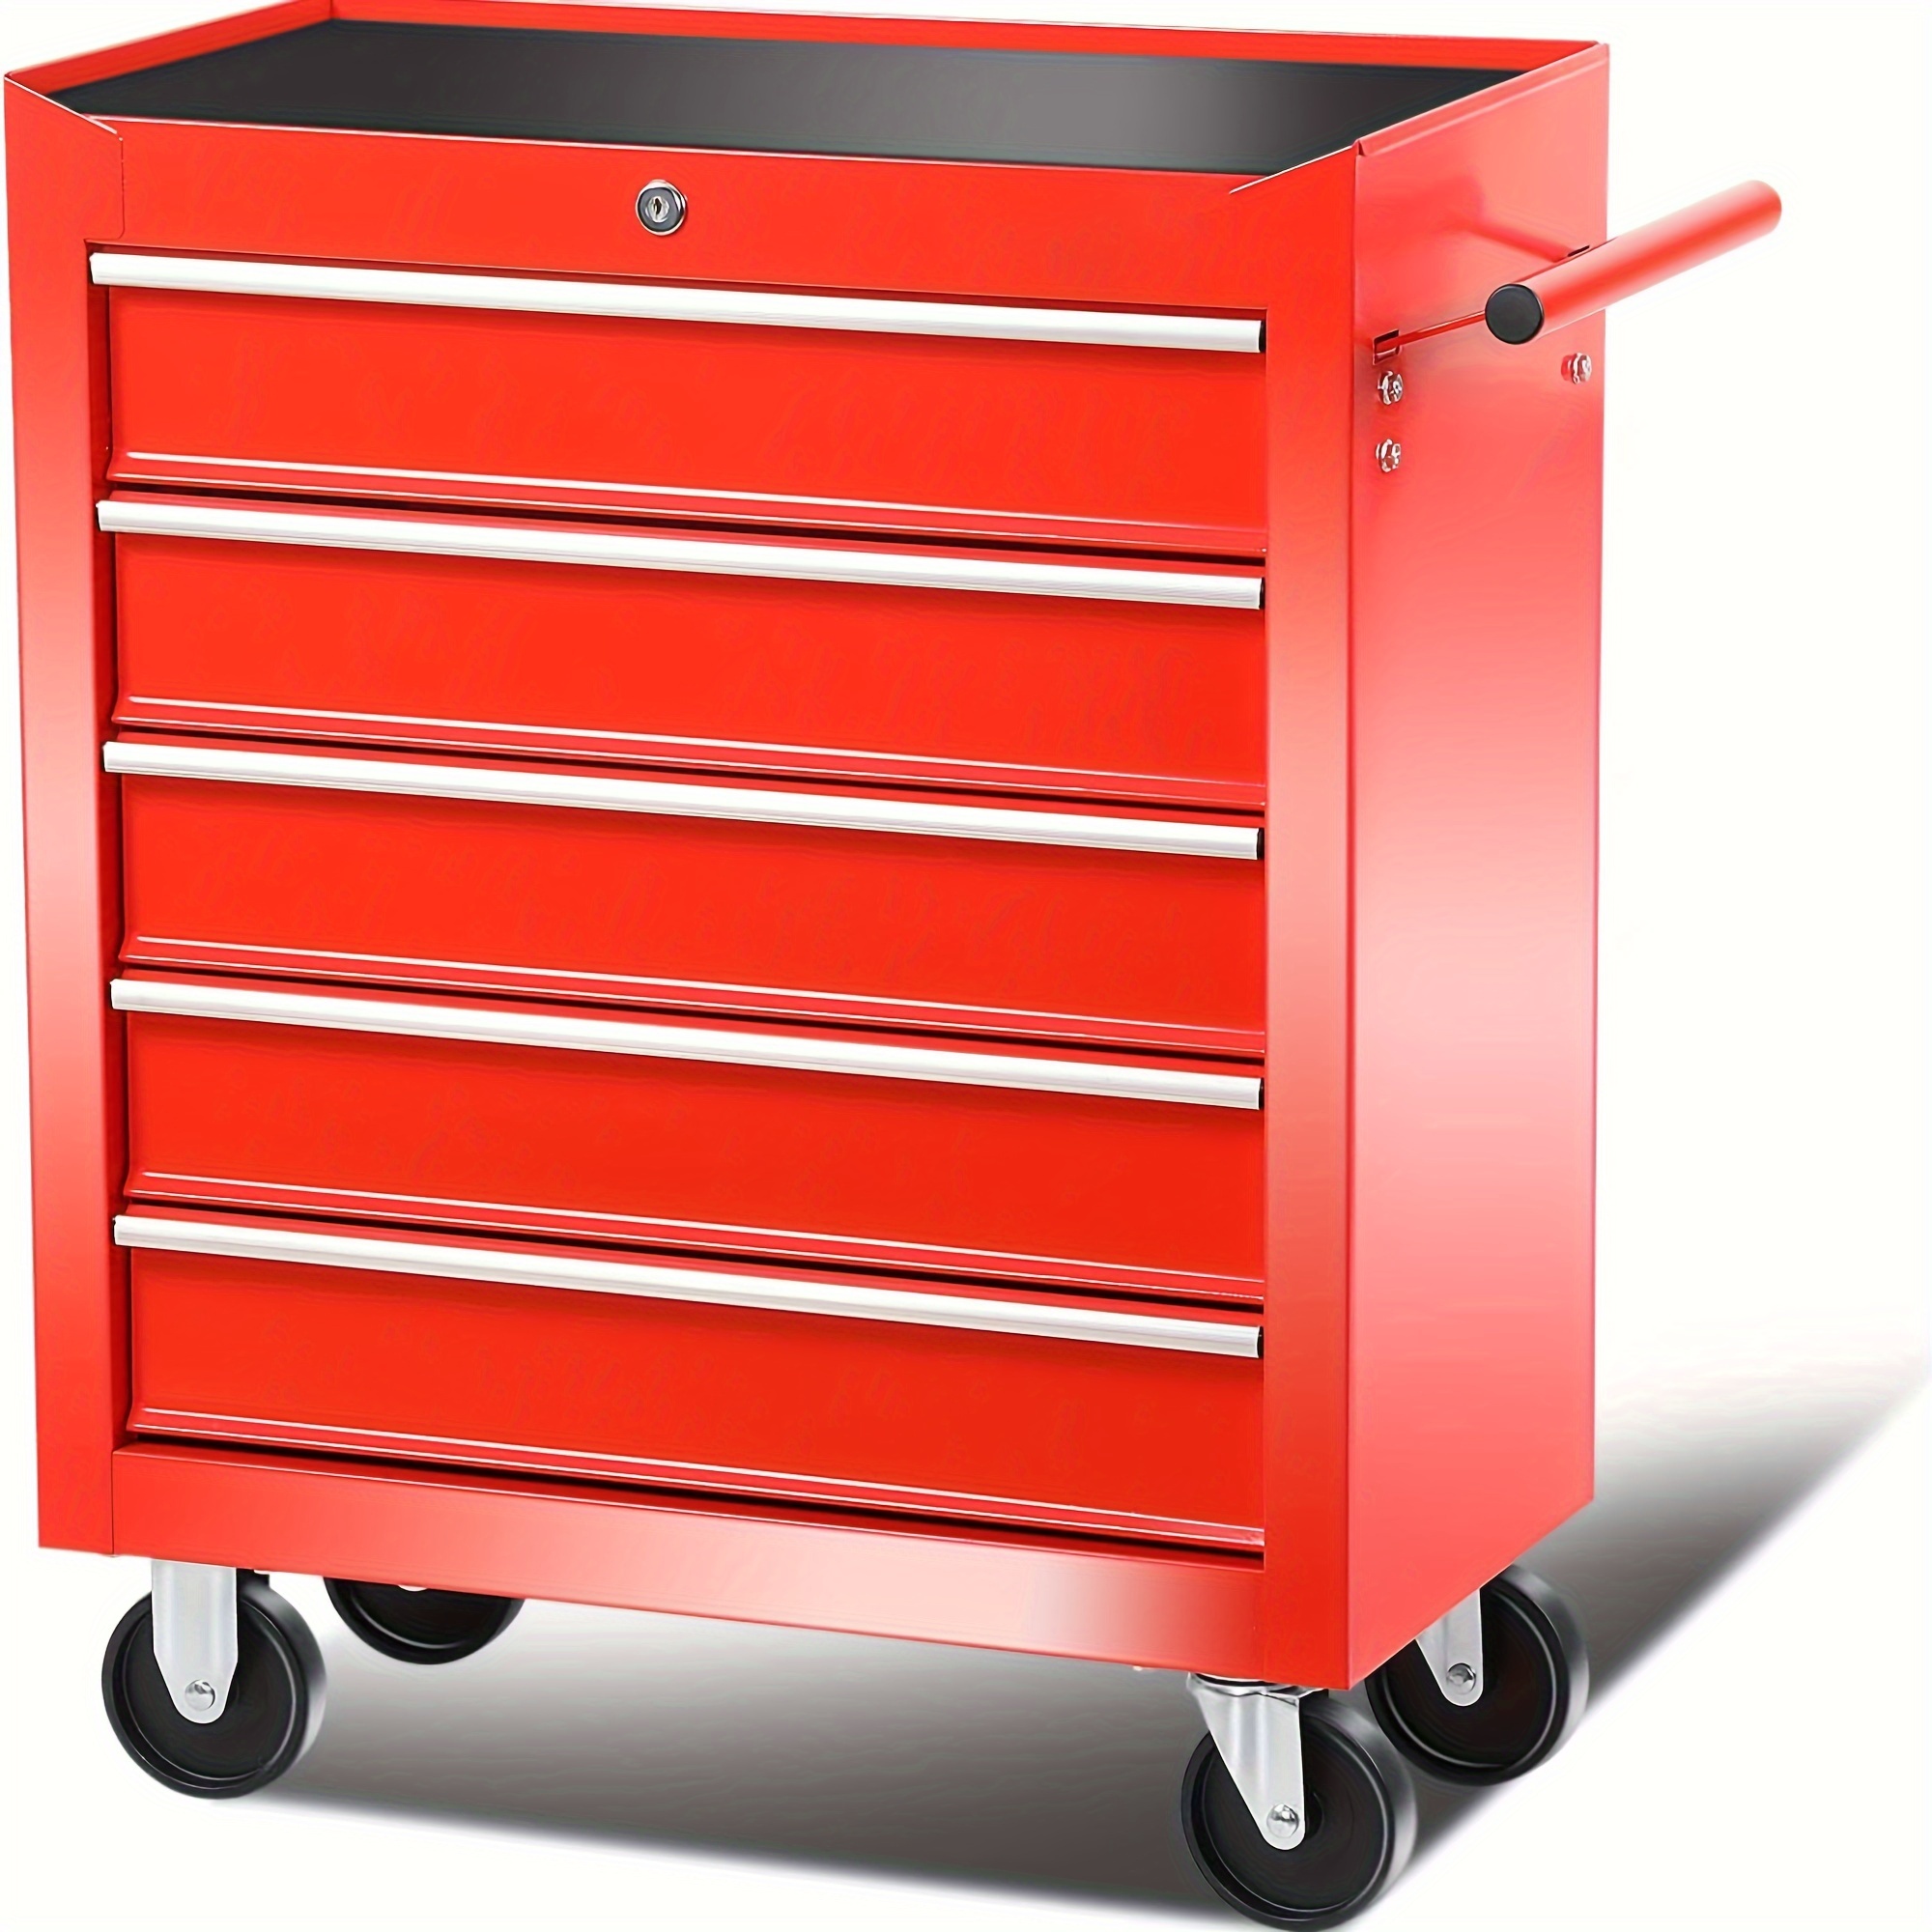 

5-drawer Plastic Top Rolling Tool Cabinet With Keyed Locking System, 13" D X 24.5" W X 30.5" H, For Home, Garage, Warehouse And Repair Shop, Red